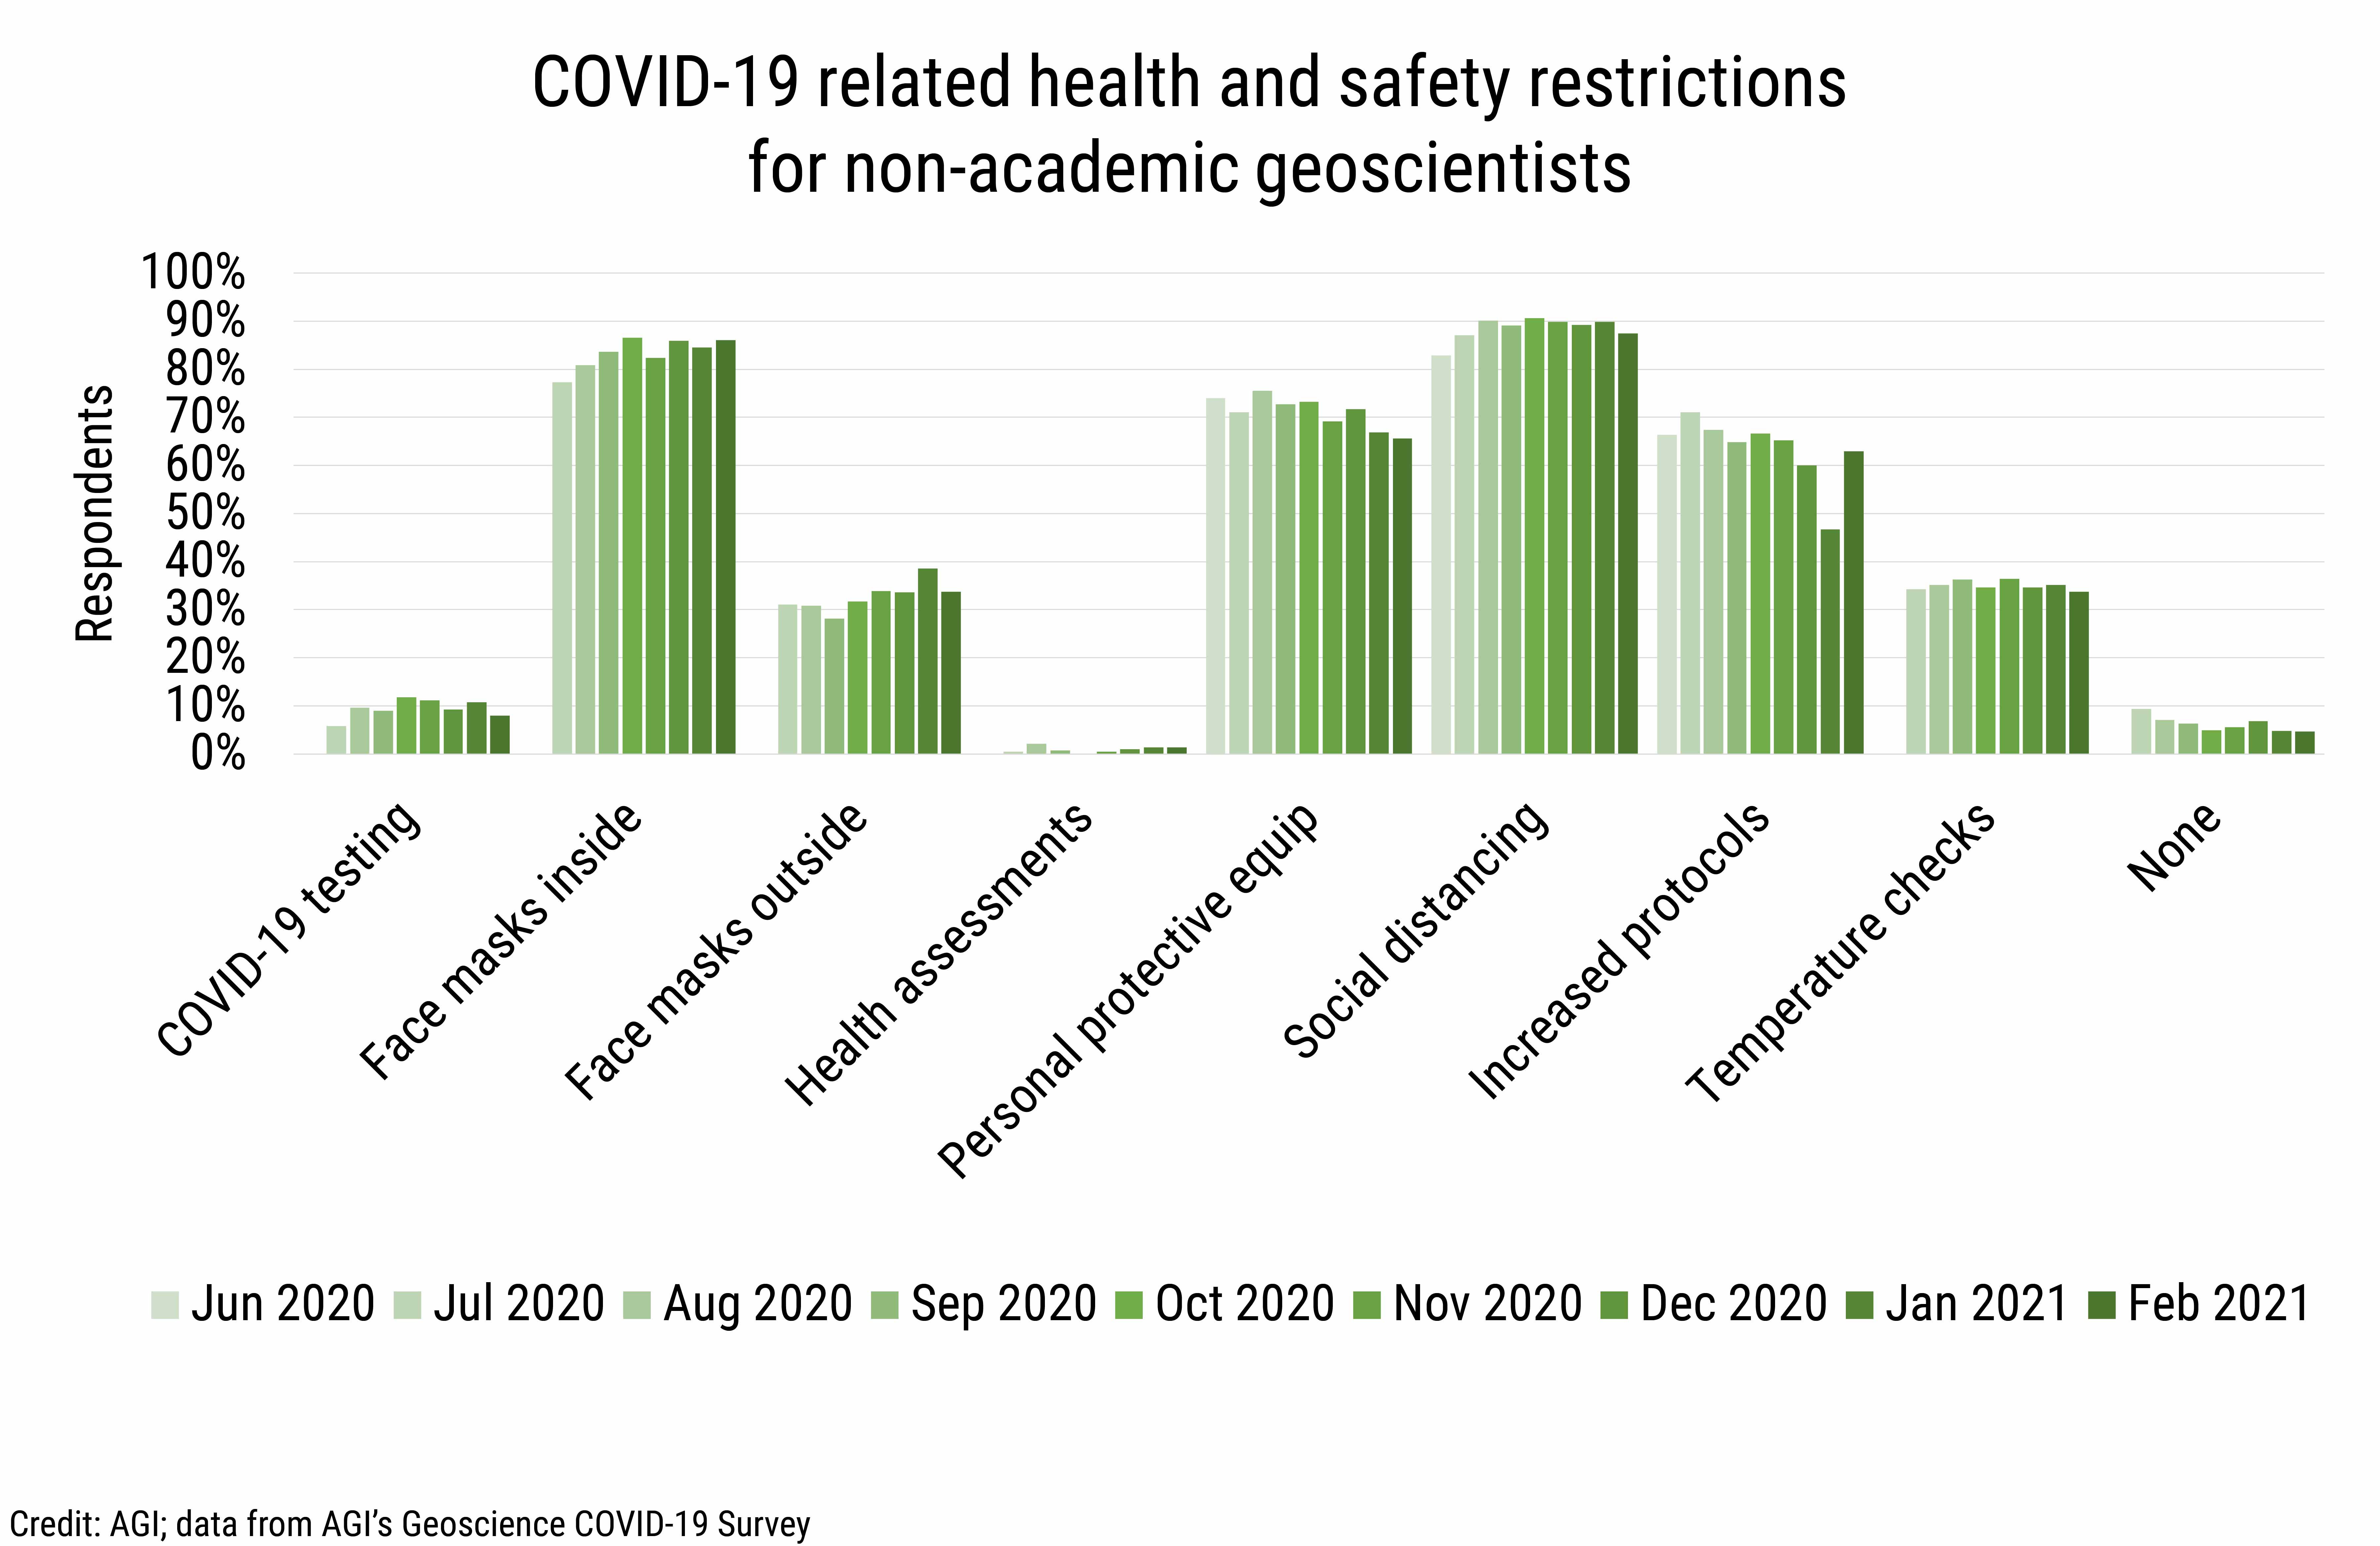 DB_2021-008 chart 03: COVID-19 related health and safety restrictions for non-academic geoscientists (Credit: AGI; data from AGI's Geoscience COVID-19 Survey)